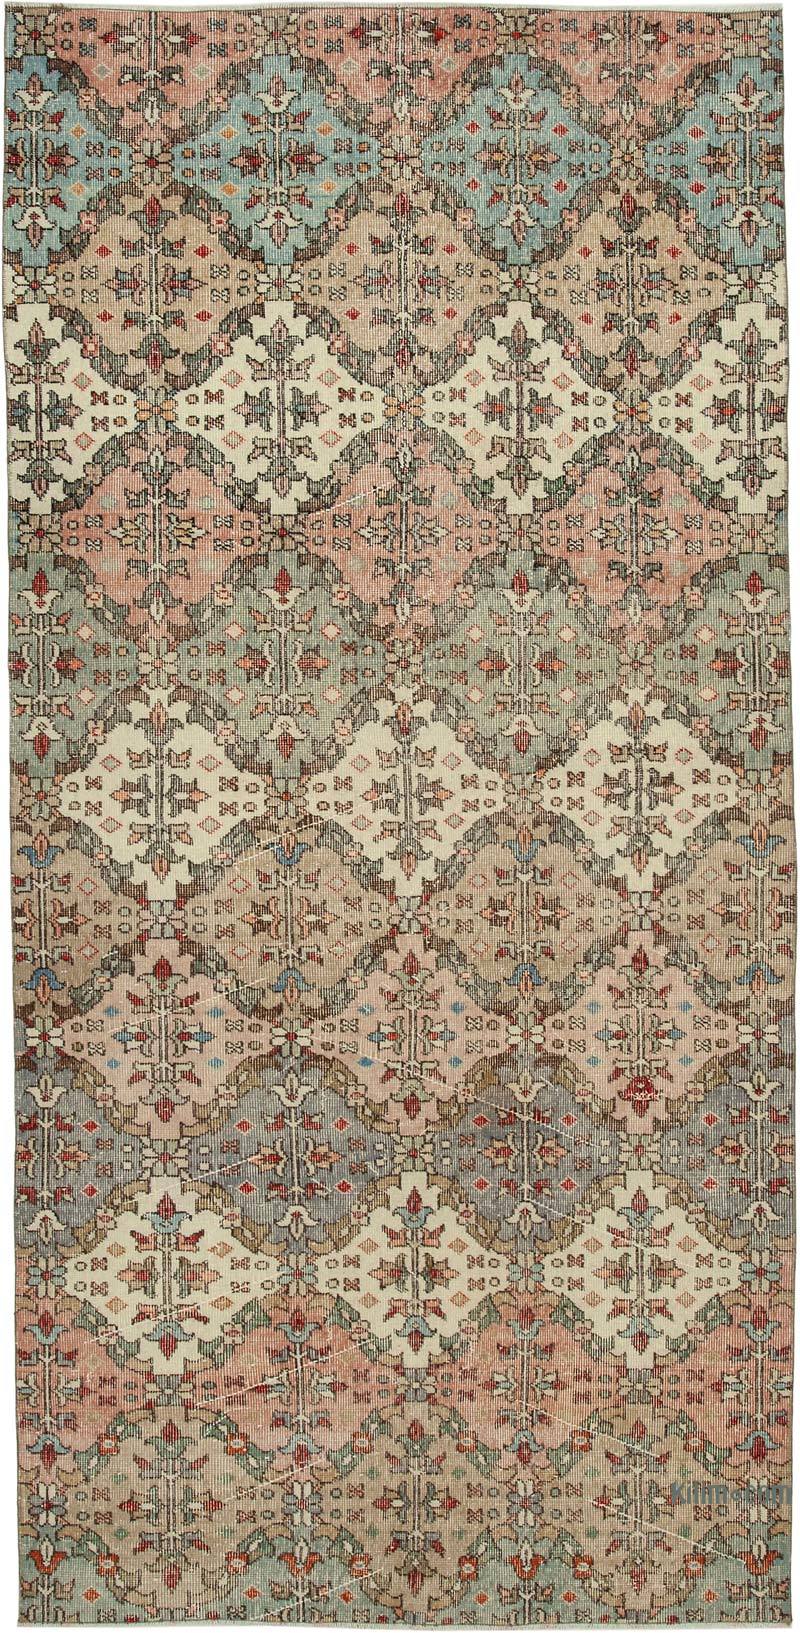 Retro Vintage Turkish Hand-Knotted Rug - 4' 6" x 9' 4" (54 in. x 112 in.) - K0038263